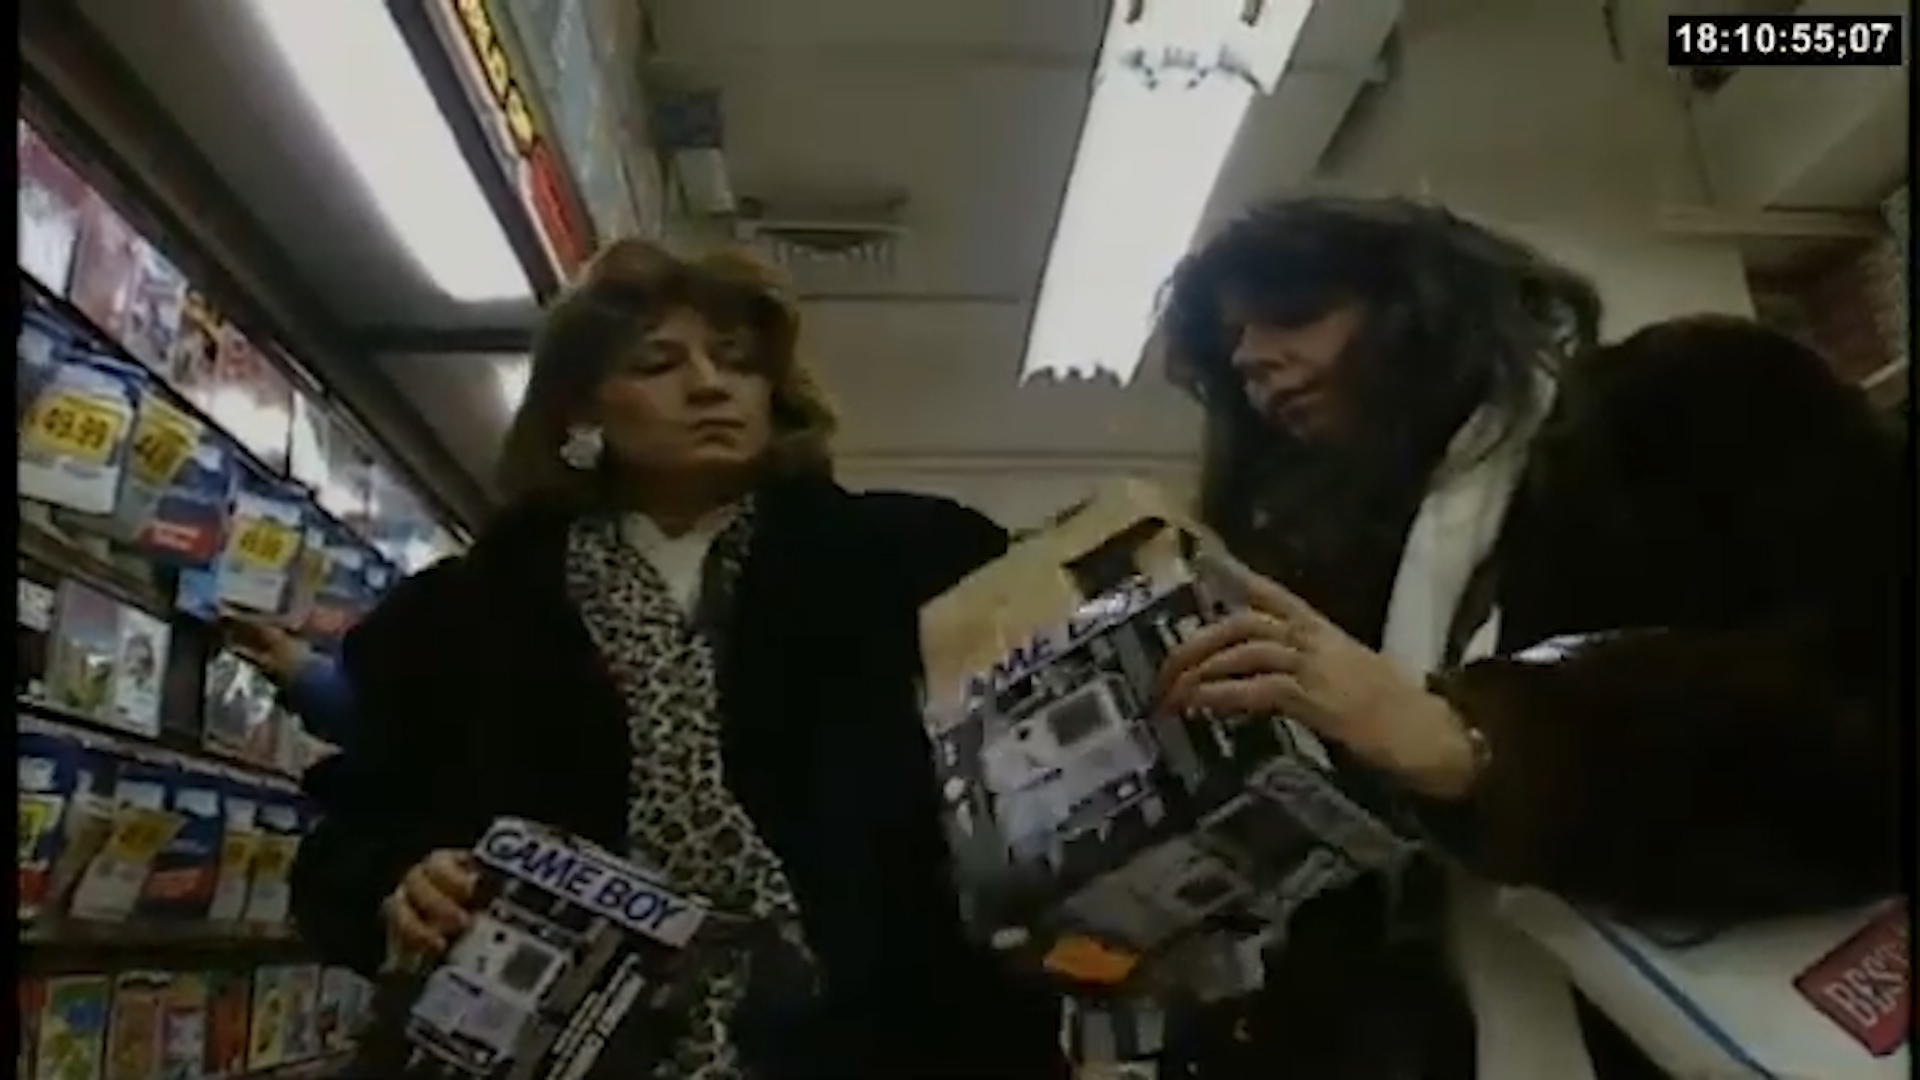 Unearthed Video Captures The Experience Of Shopping At Toys ‘R’ Us In The Early ’90s